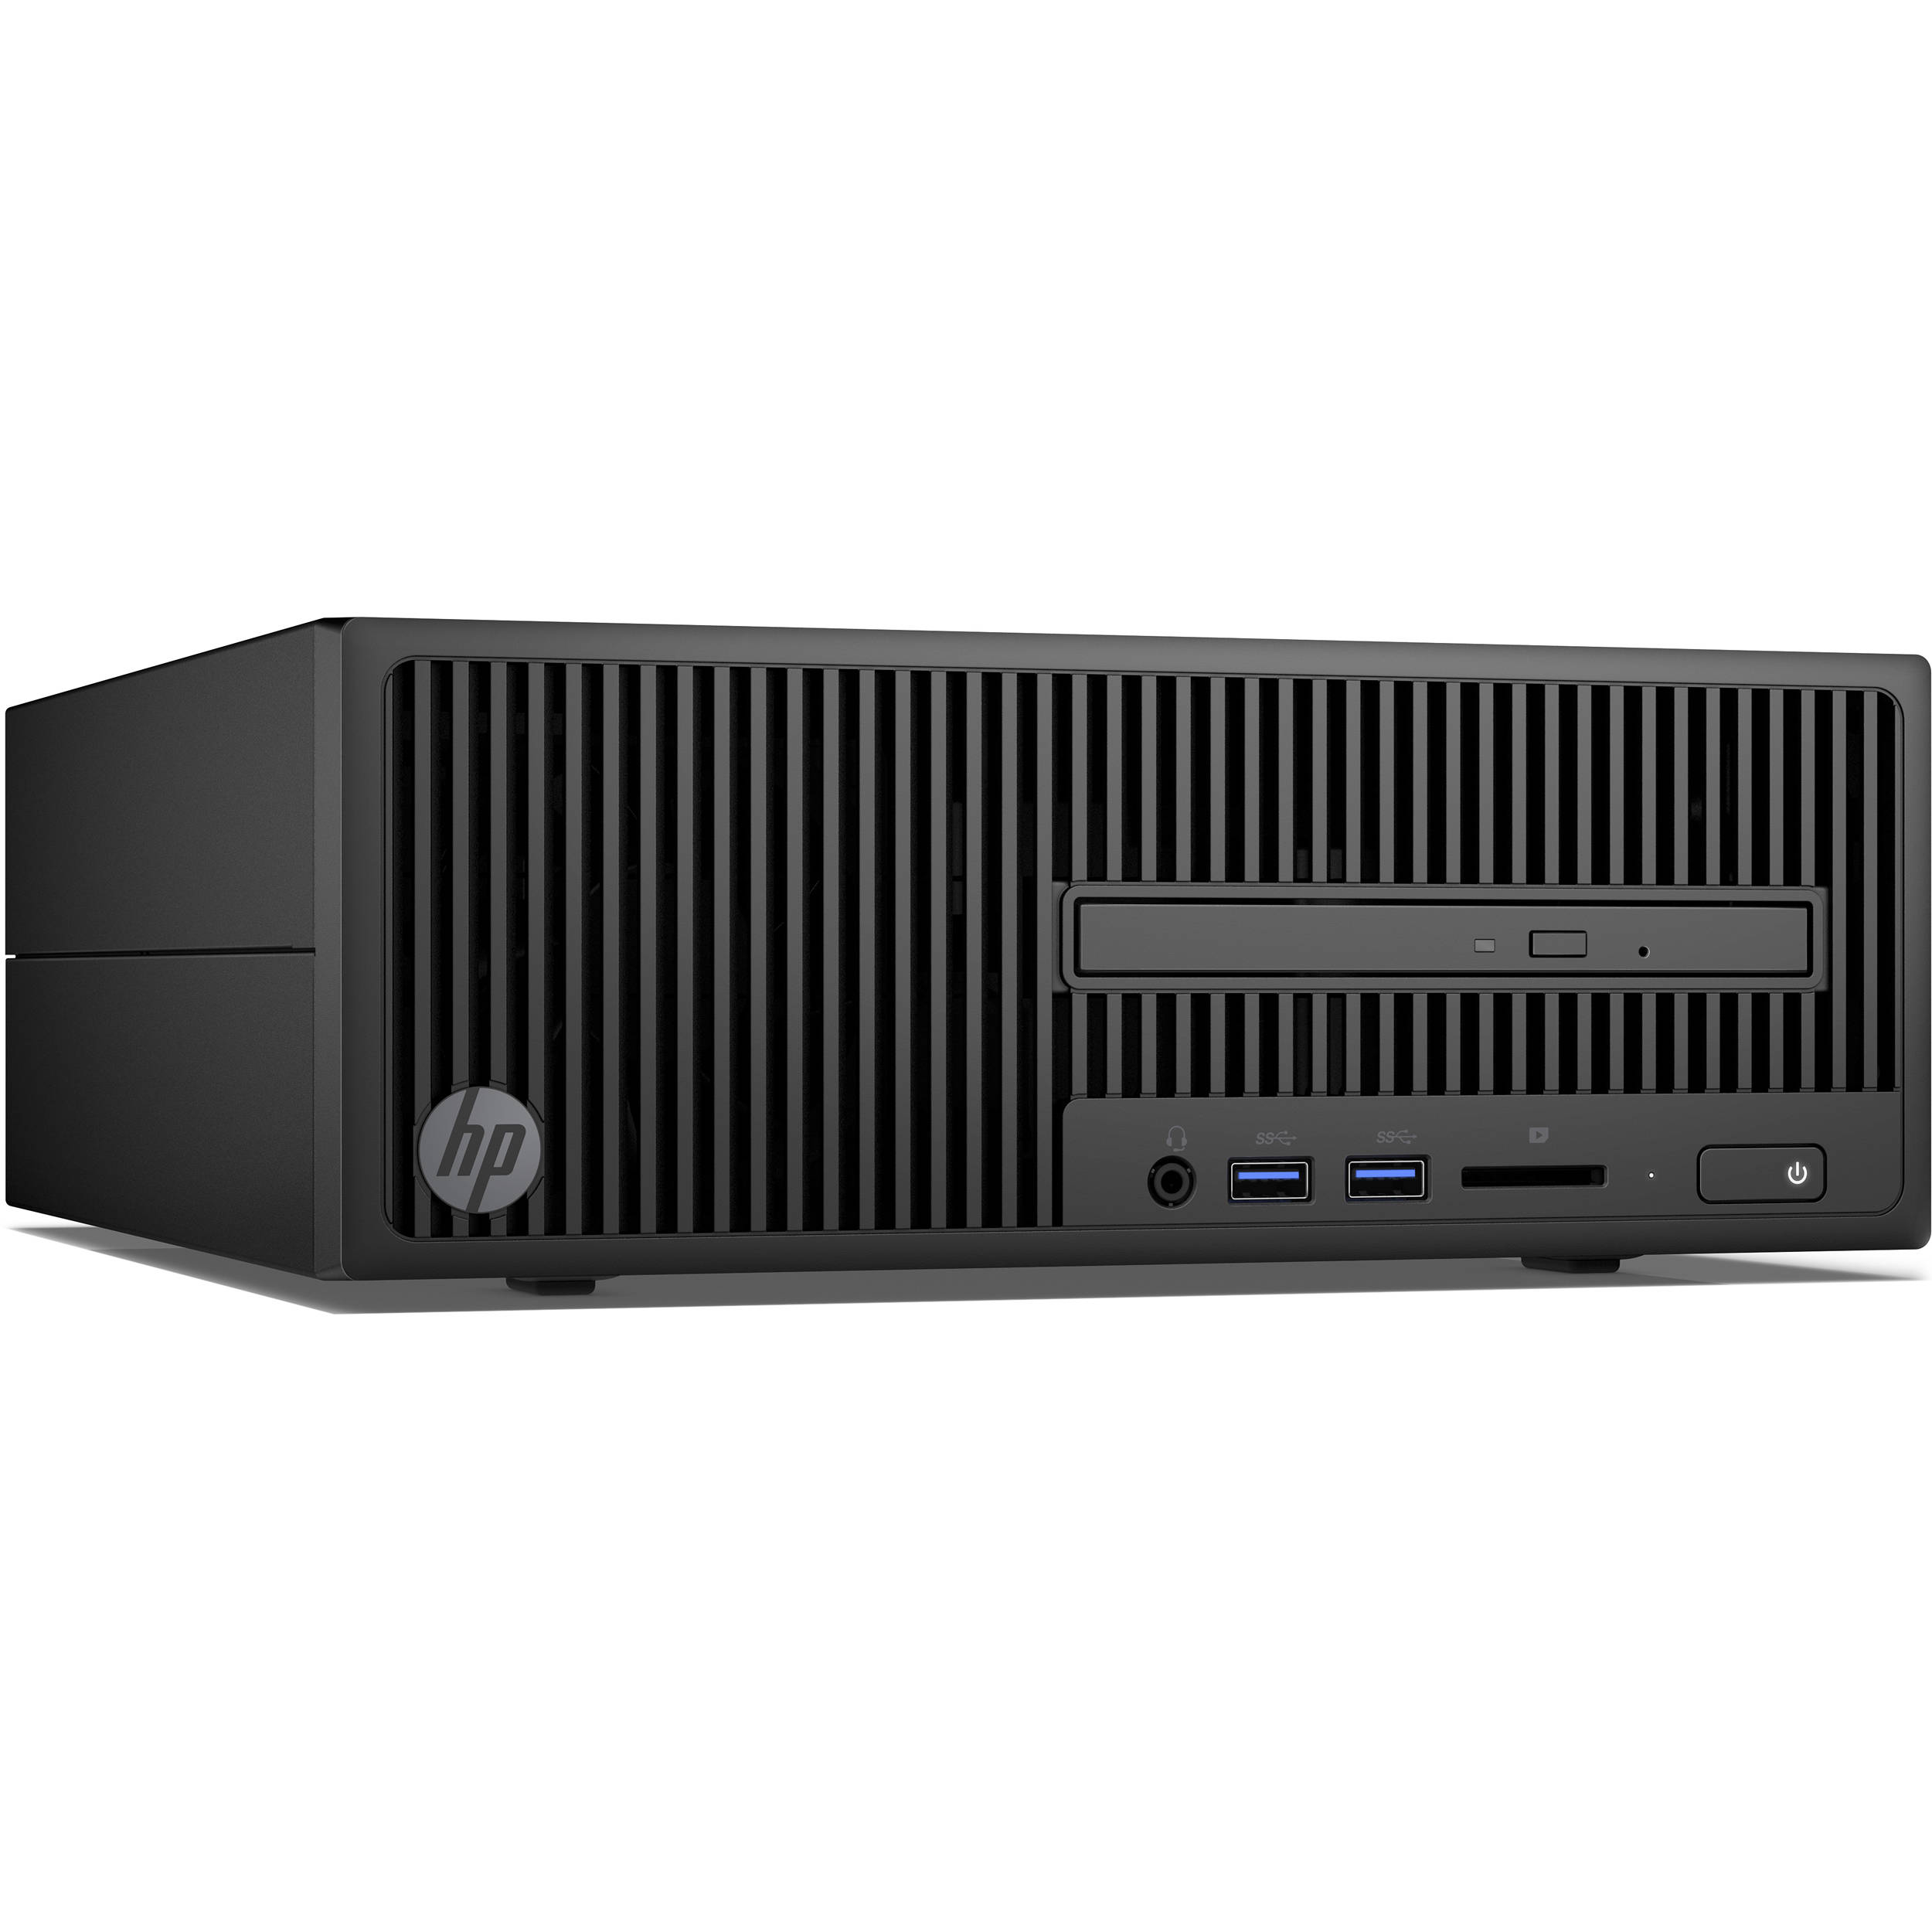 280 G2 Small Form Factor PC